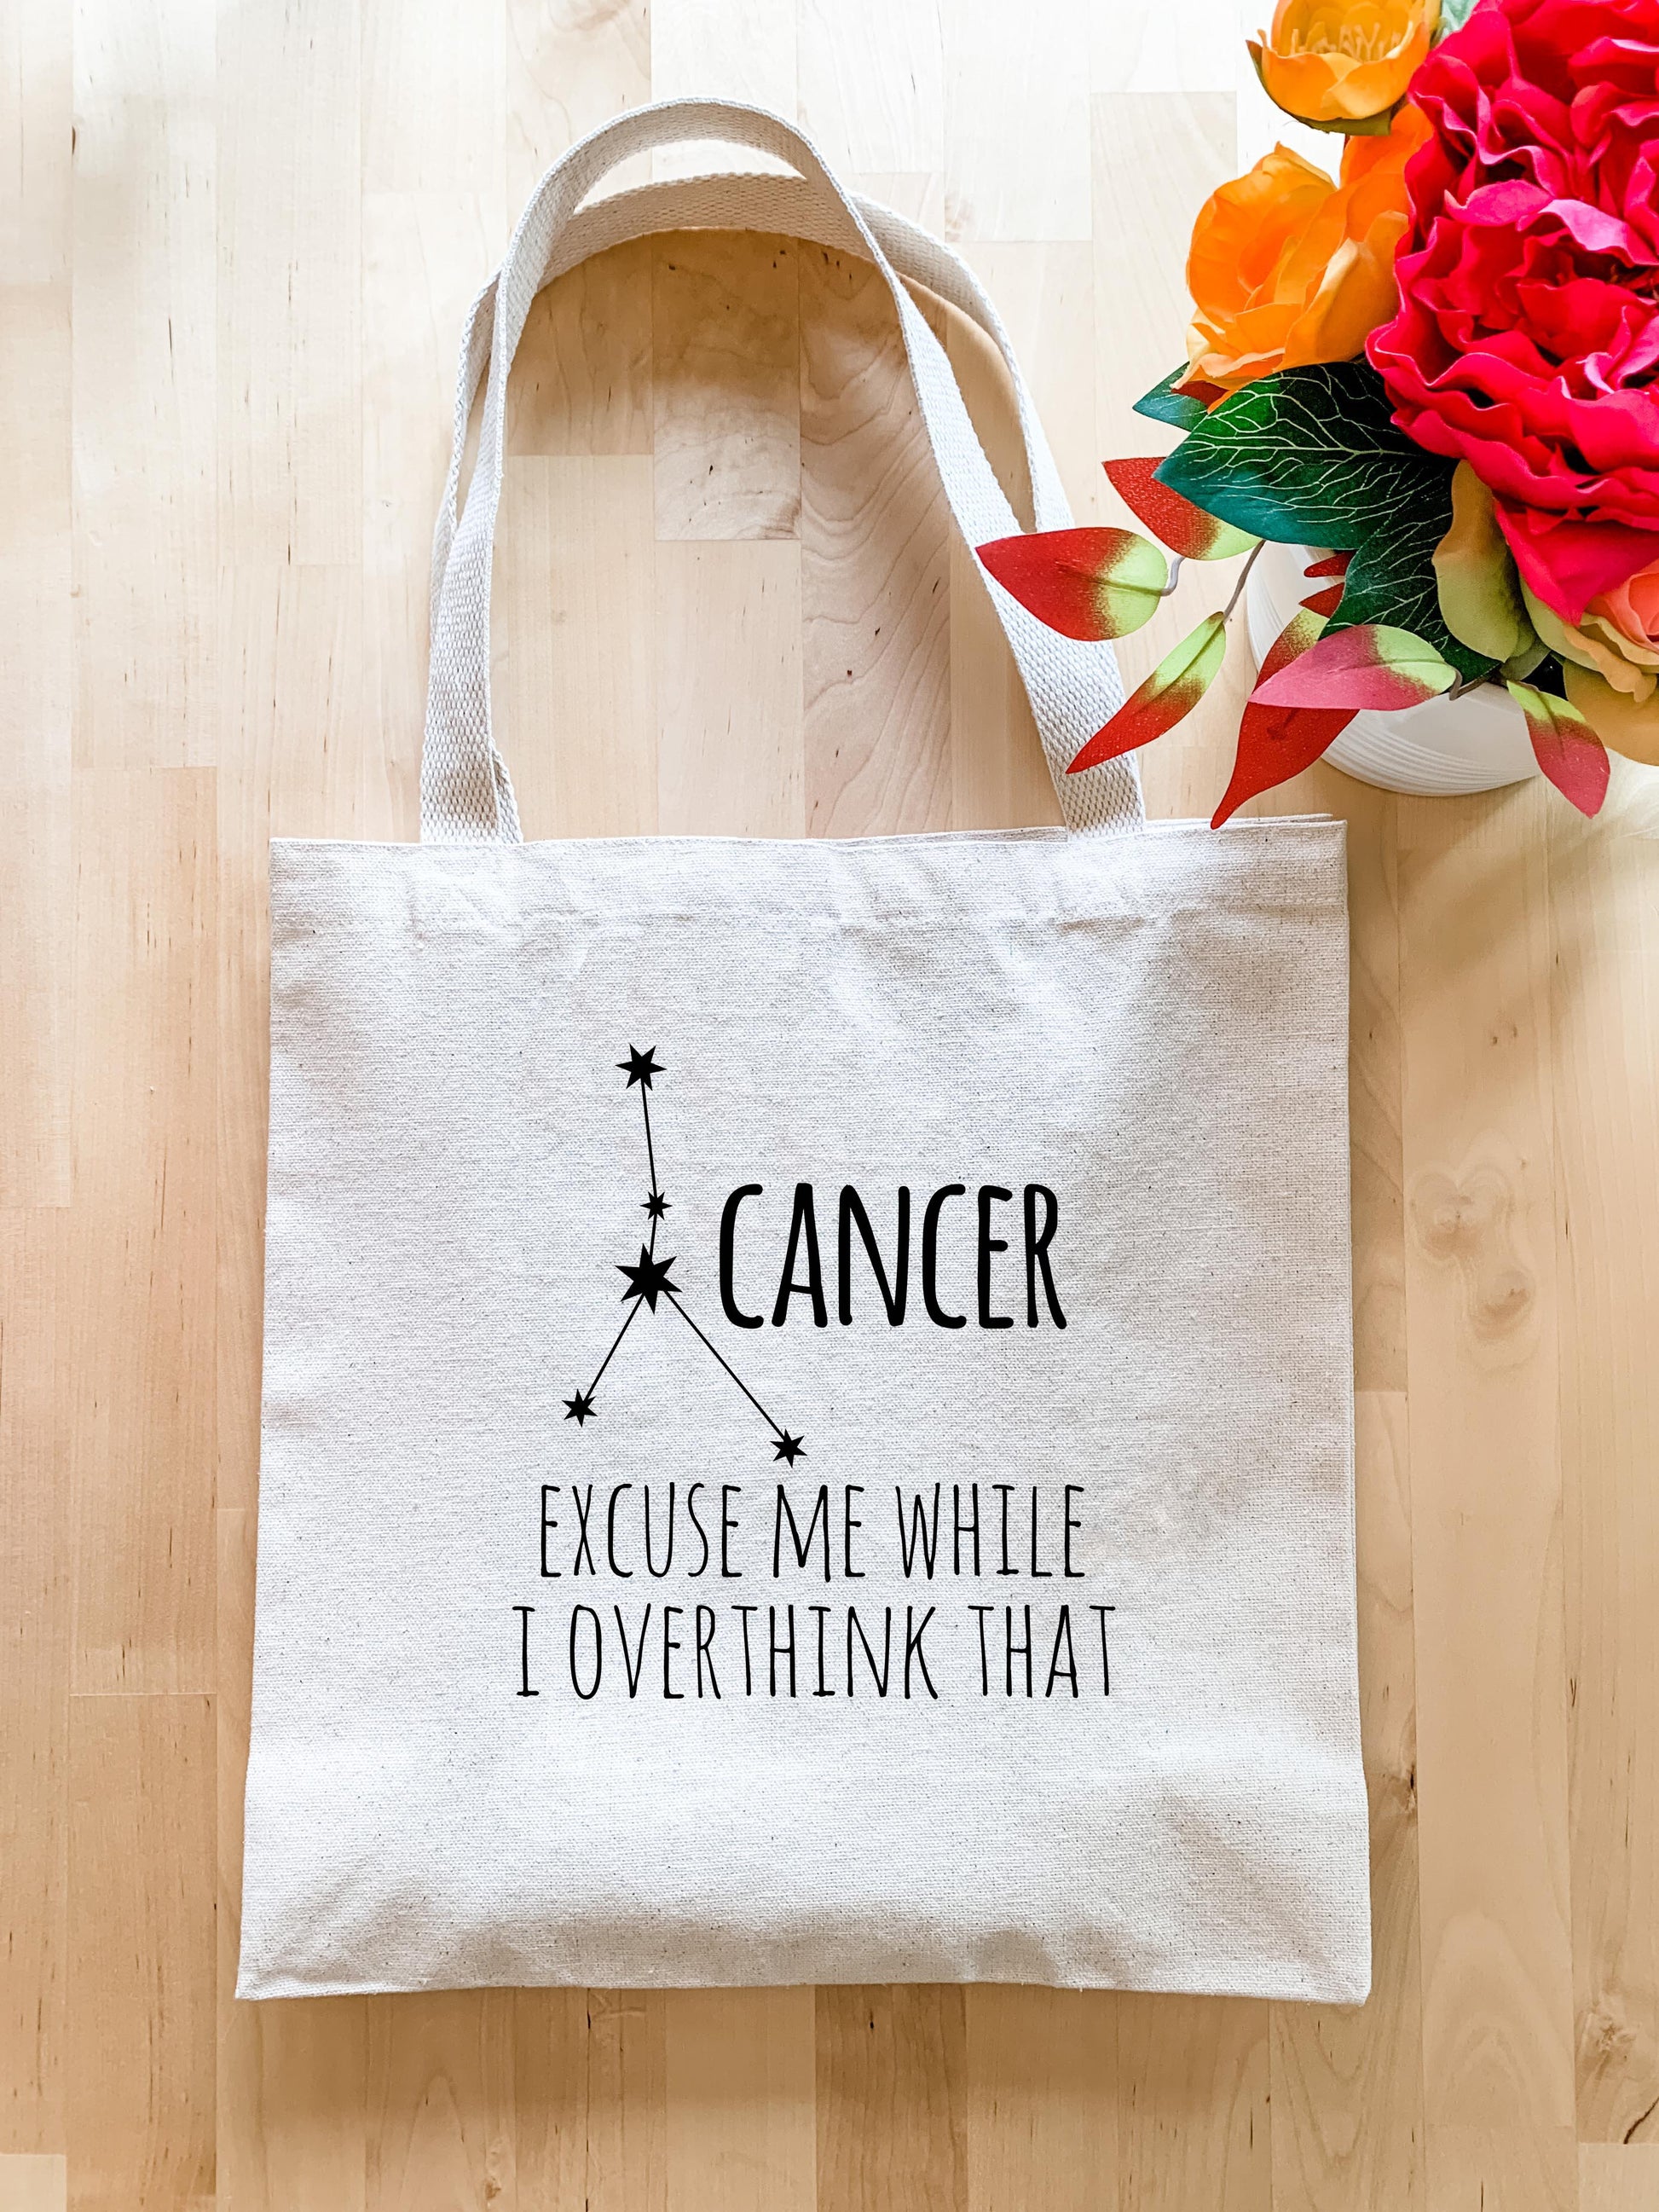 Cancer Zodiac (Excuse Me While I Overthink That) - Tote Bag - MoonlightMakers